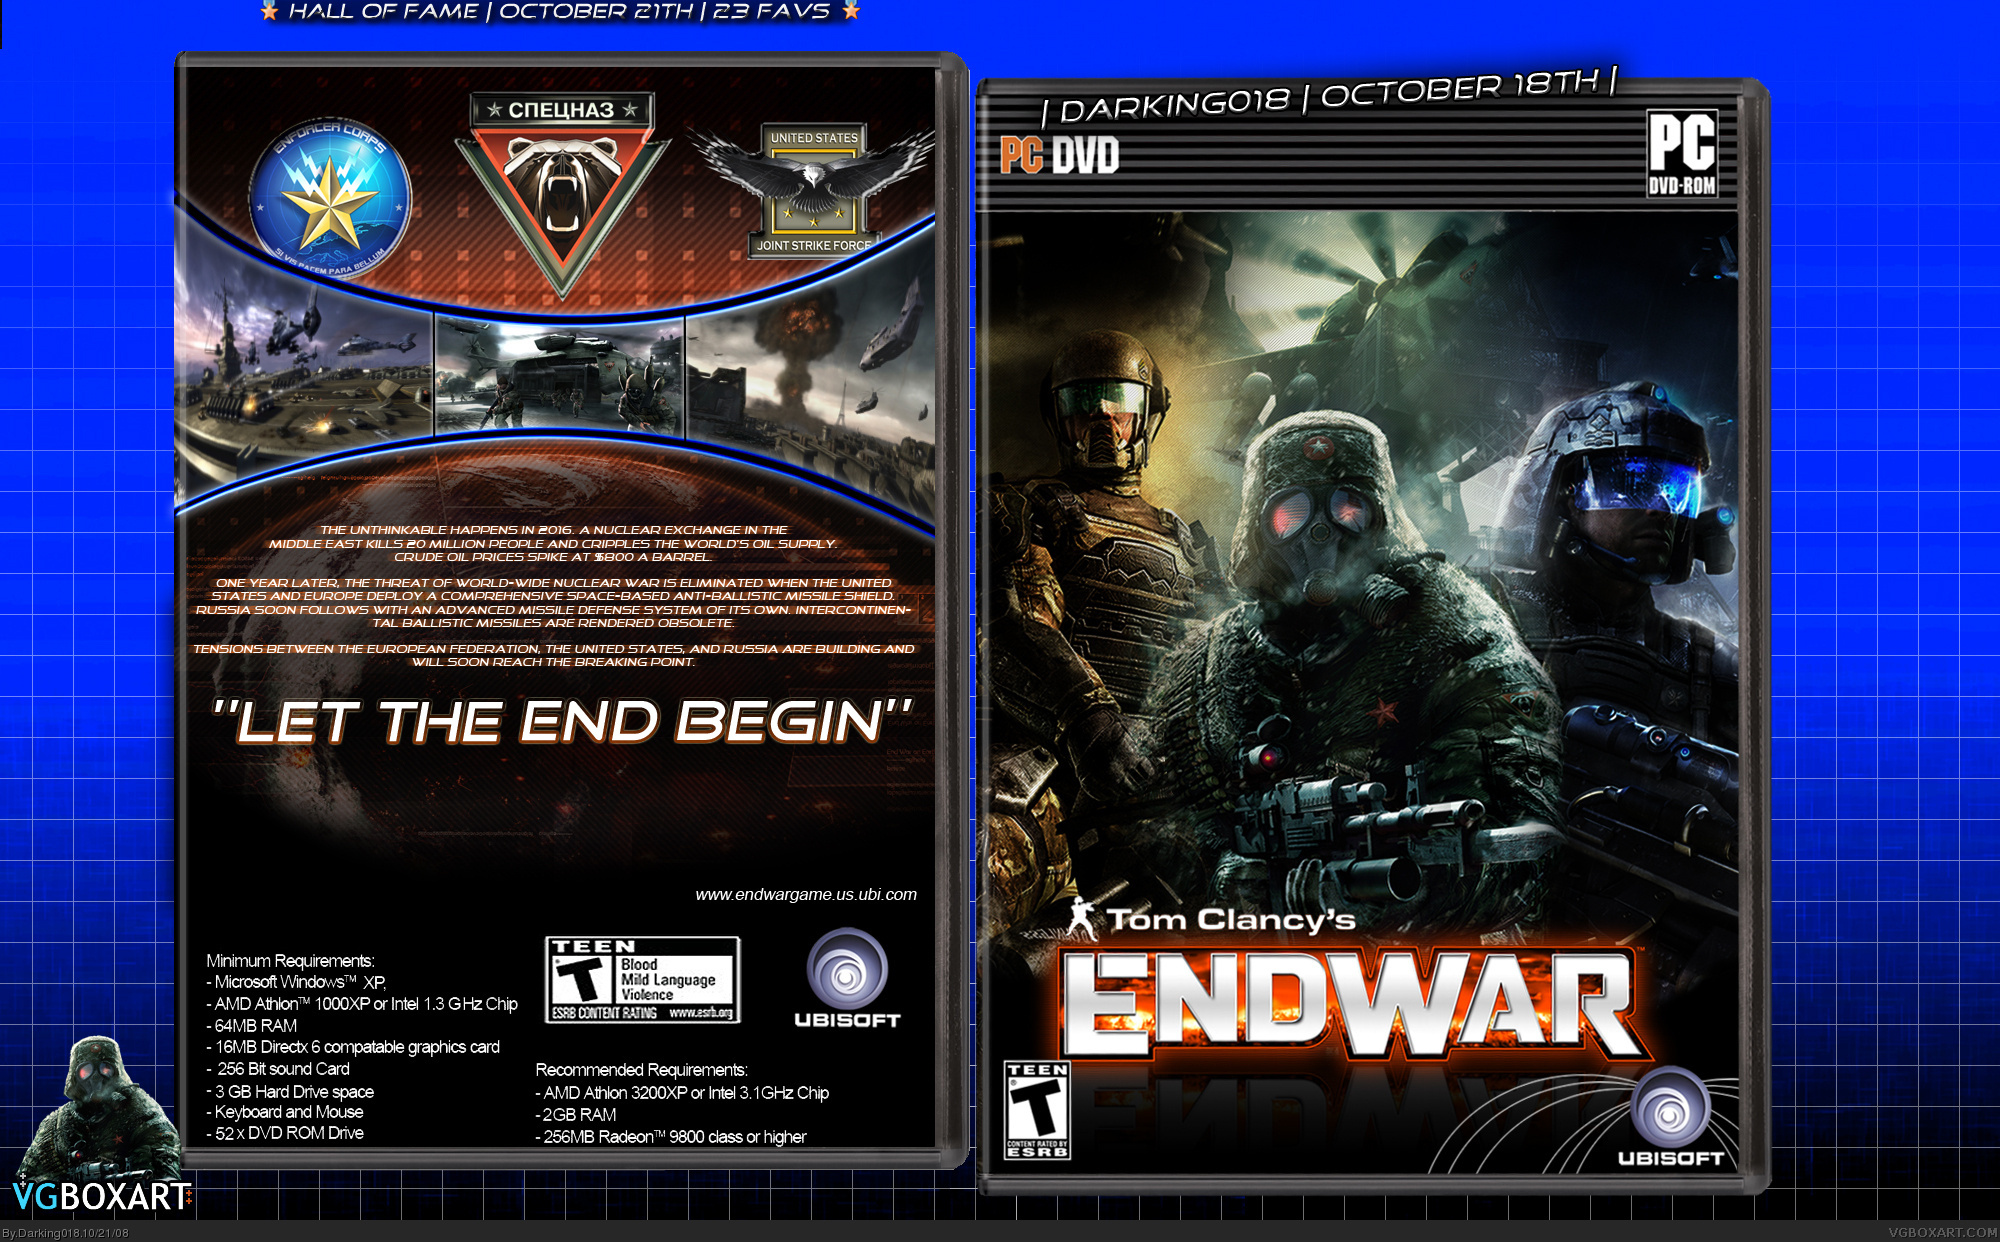 Tom Clancy's End War box cover